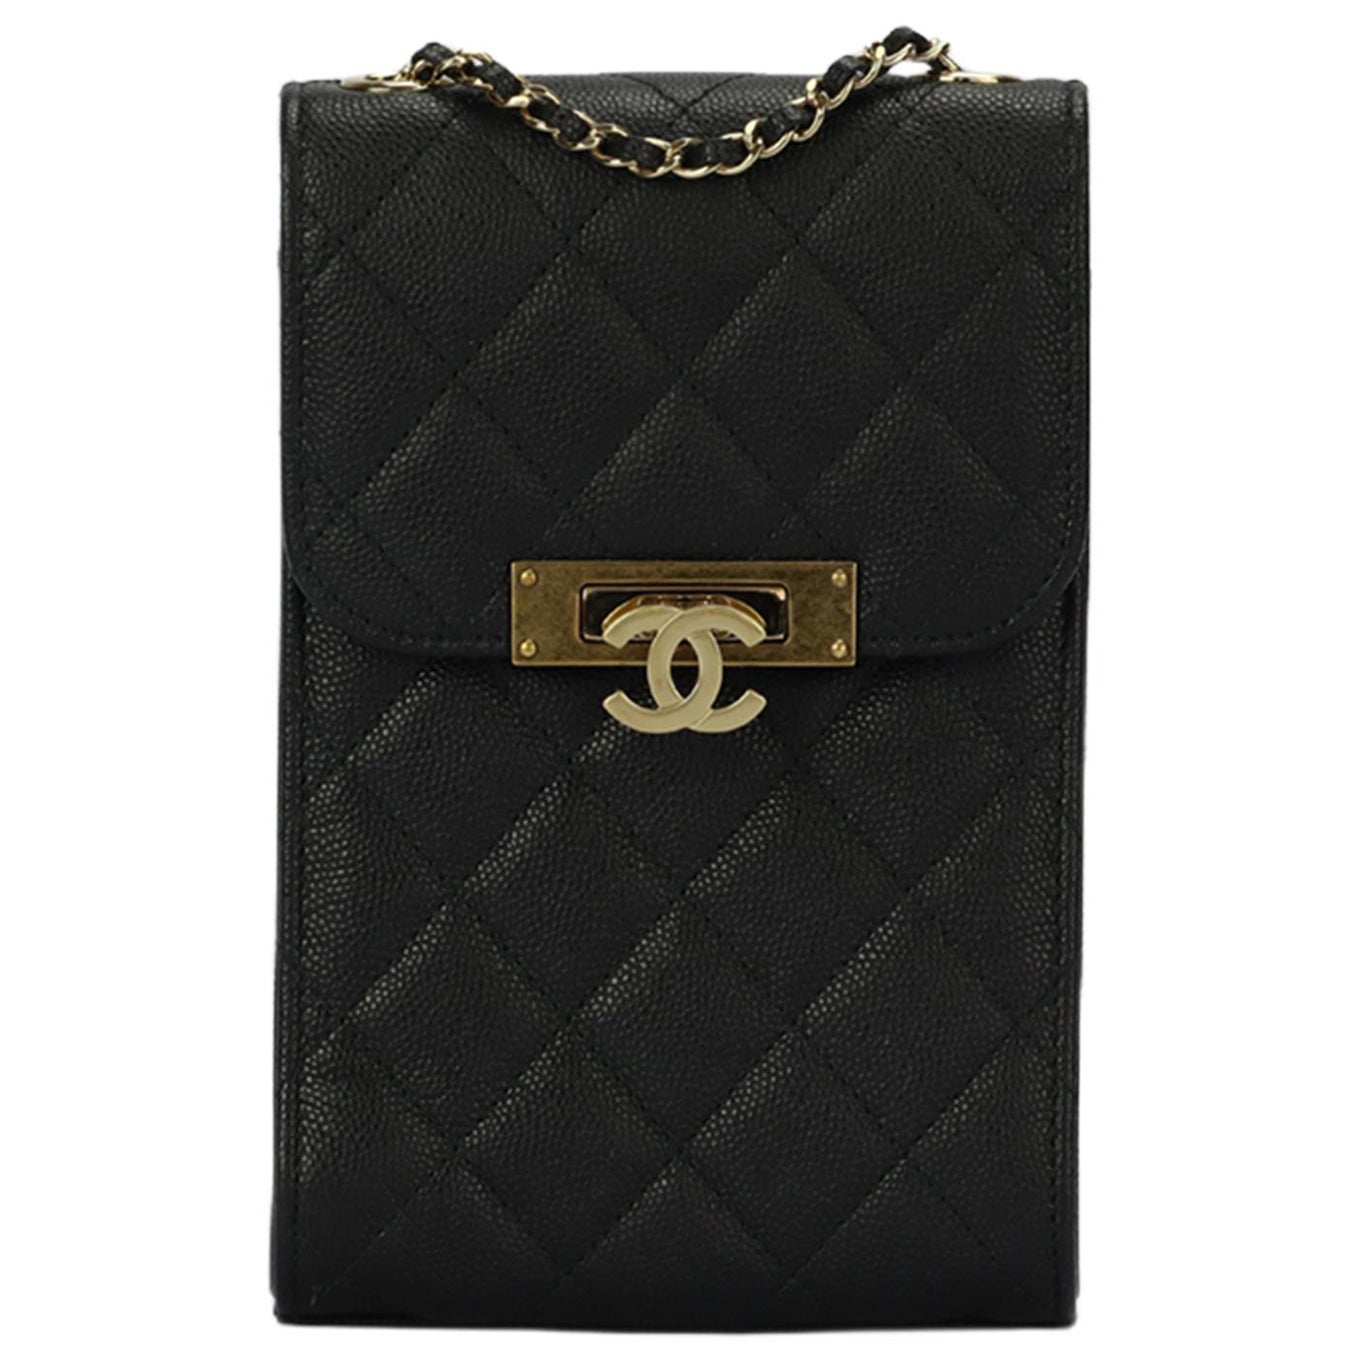 Chanel 2016 Golden Class Phone Holder Quilted Caviar Leather Shoulder Bag